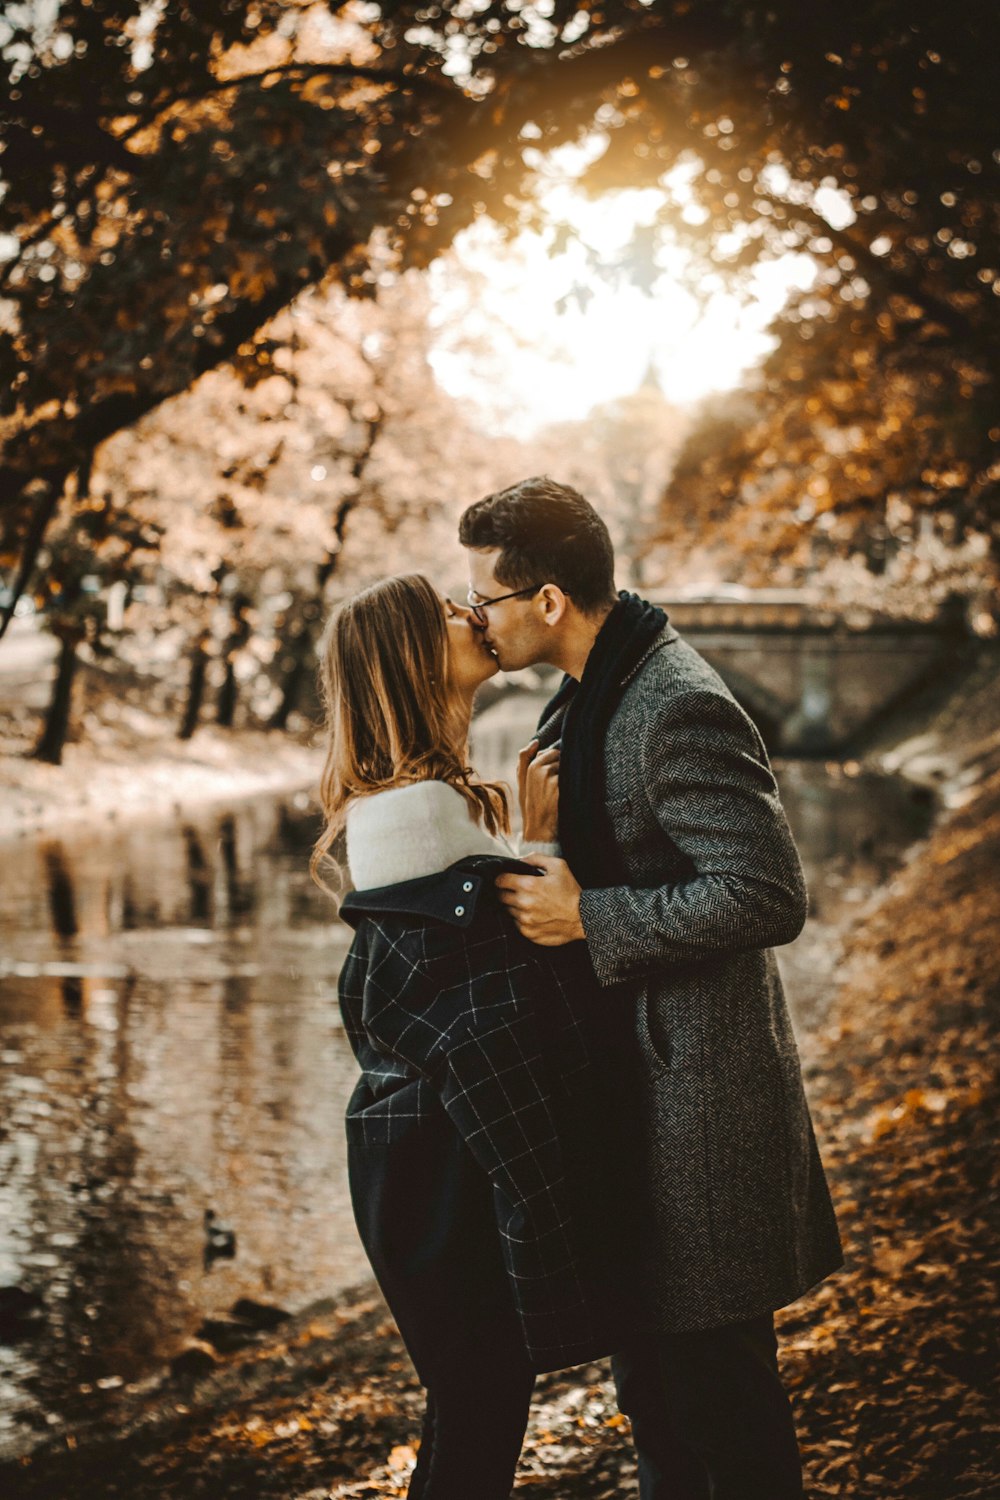 550+ Passionate Kiss Pictures | Download Free Images on Unsplash